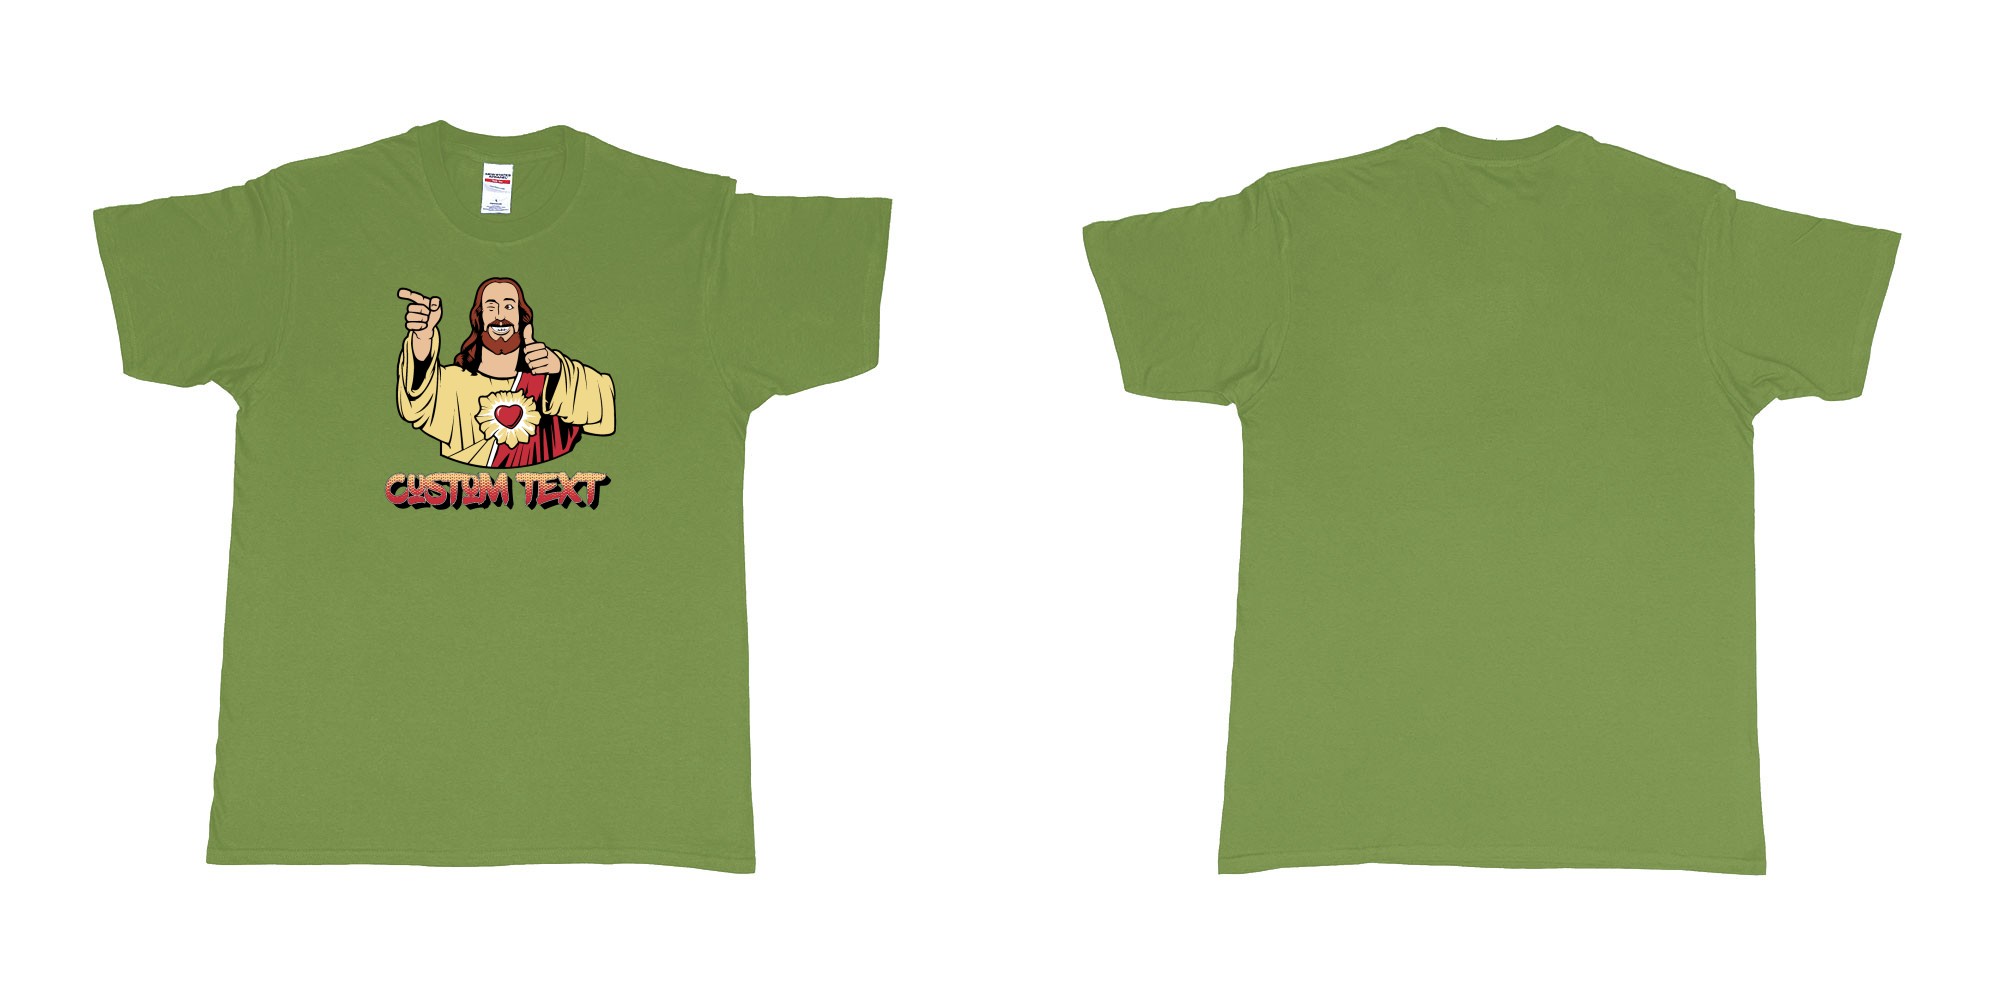 Custom tshirt design buddy christ custom text in fabric color military-green choice your own text made in Bali by The Pirate Way